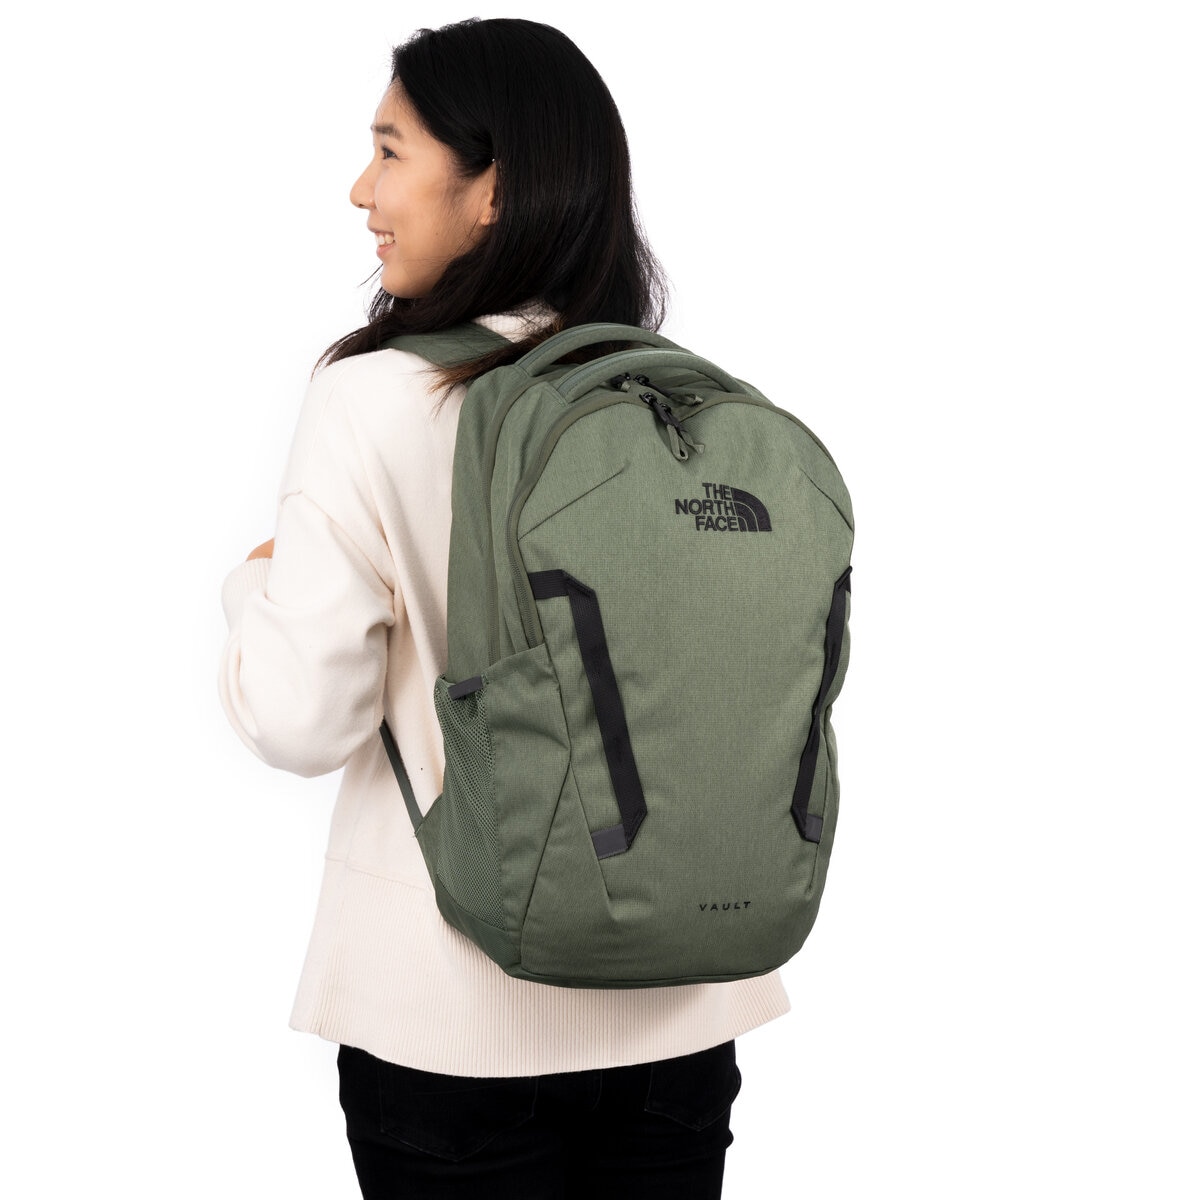 THE NORTH FACE リュックサック NF0A3VY2 JK… カーキ